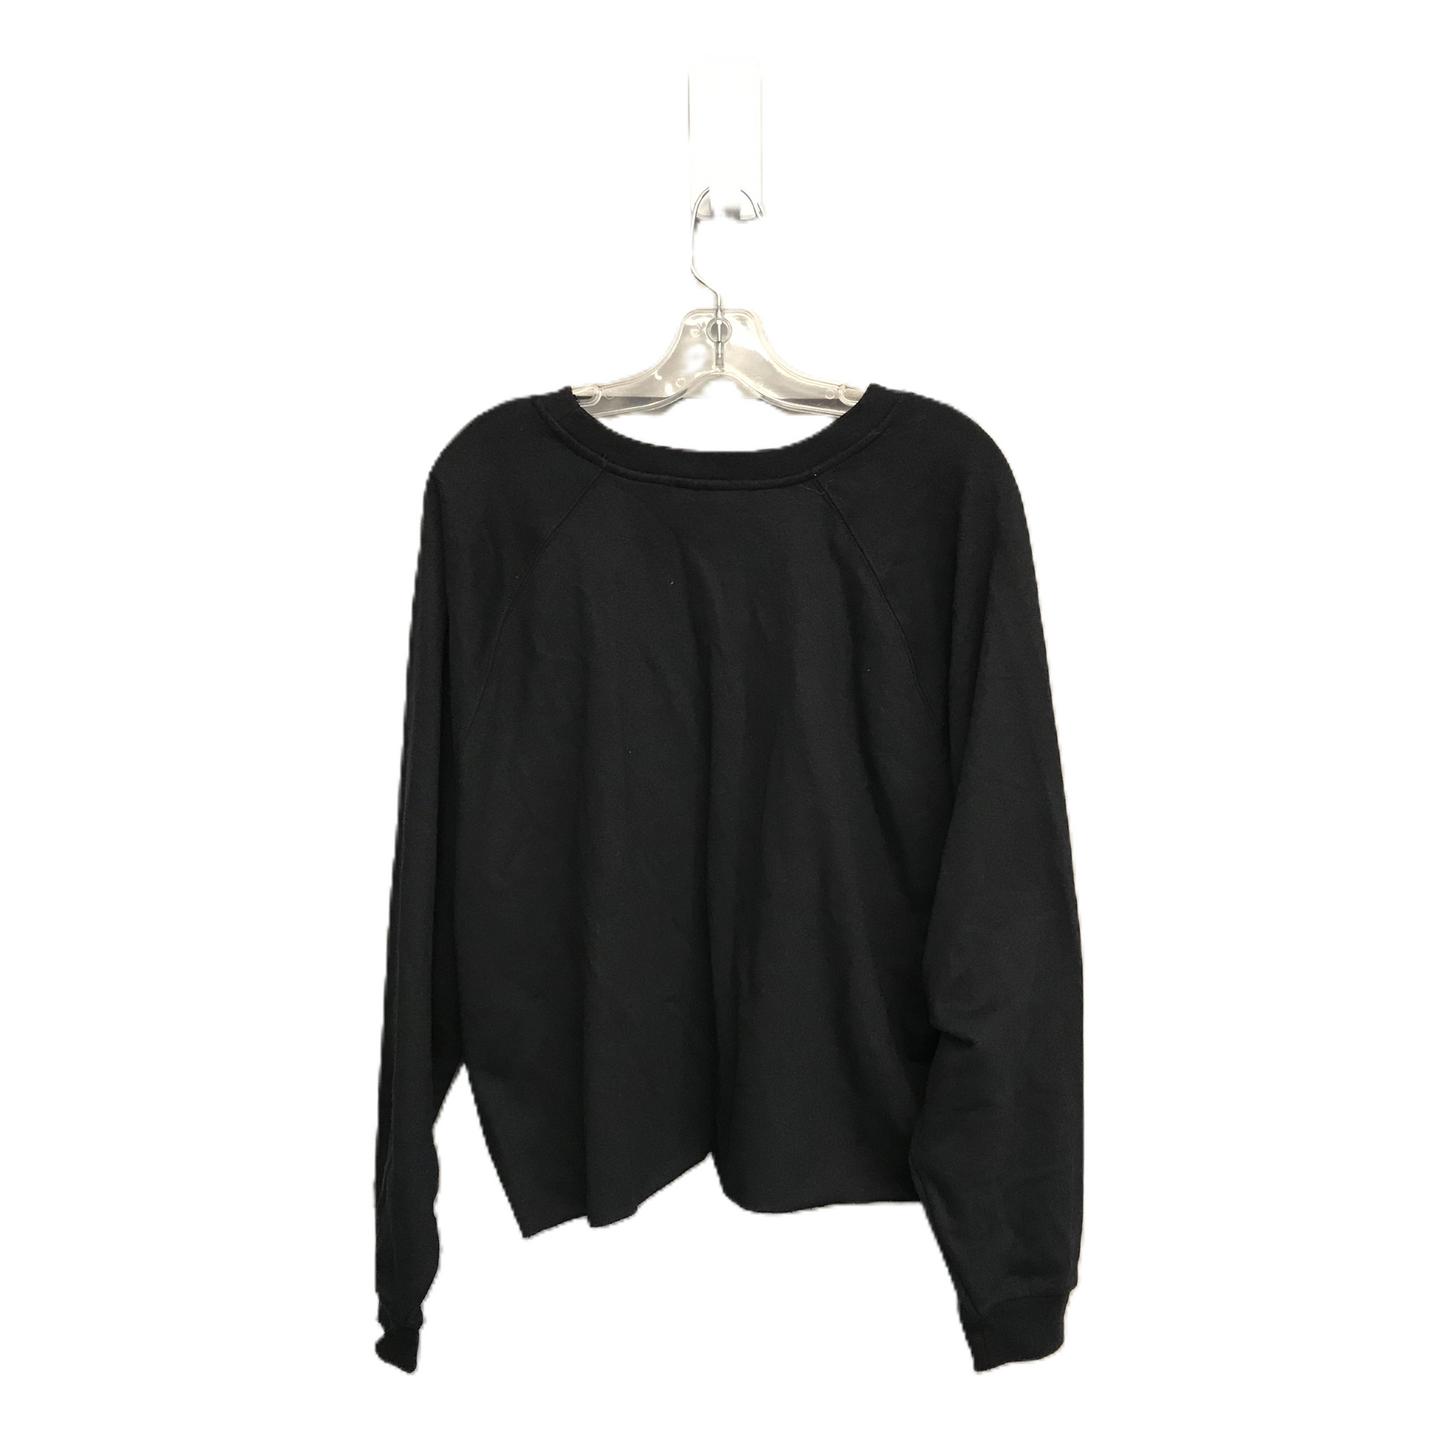 Black Top Long Sleeve By Levis, Size: 2x